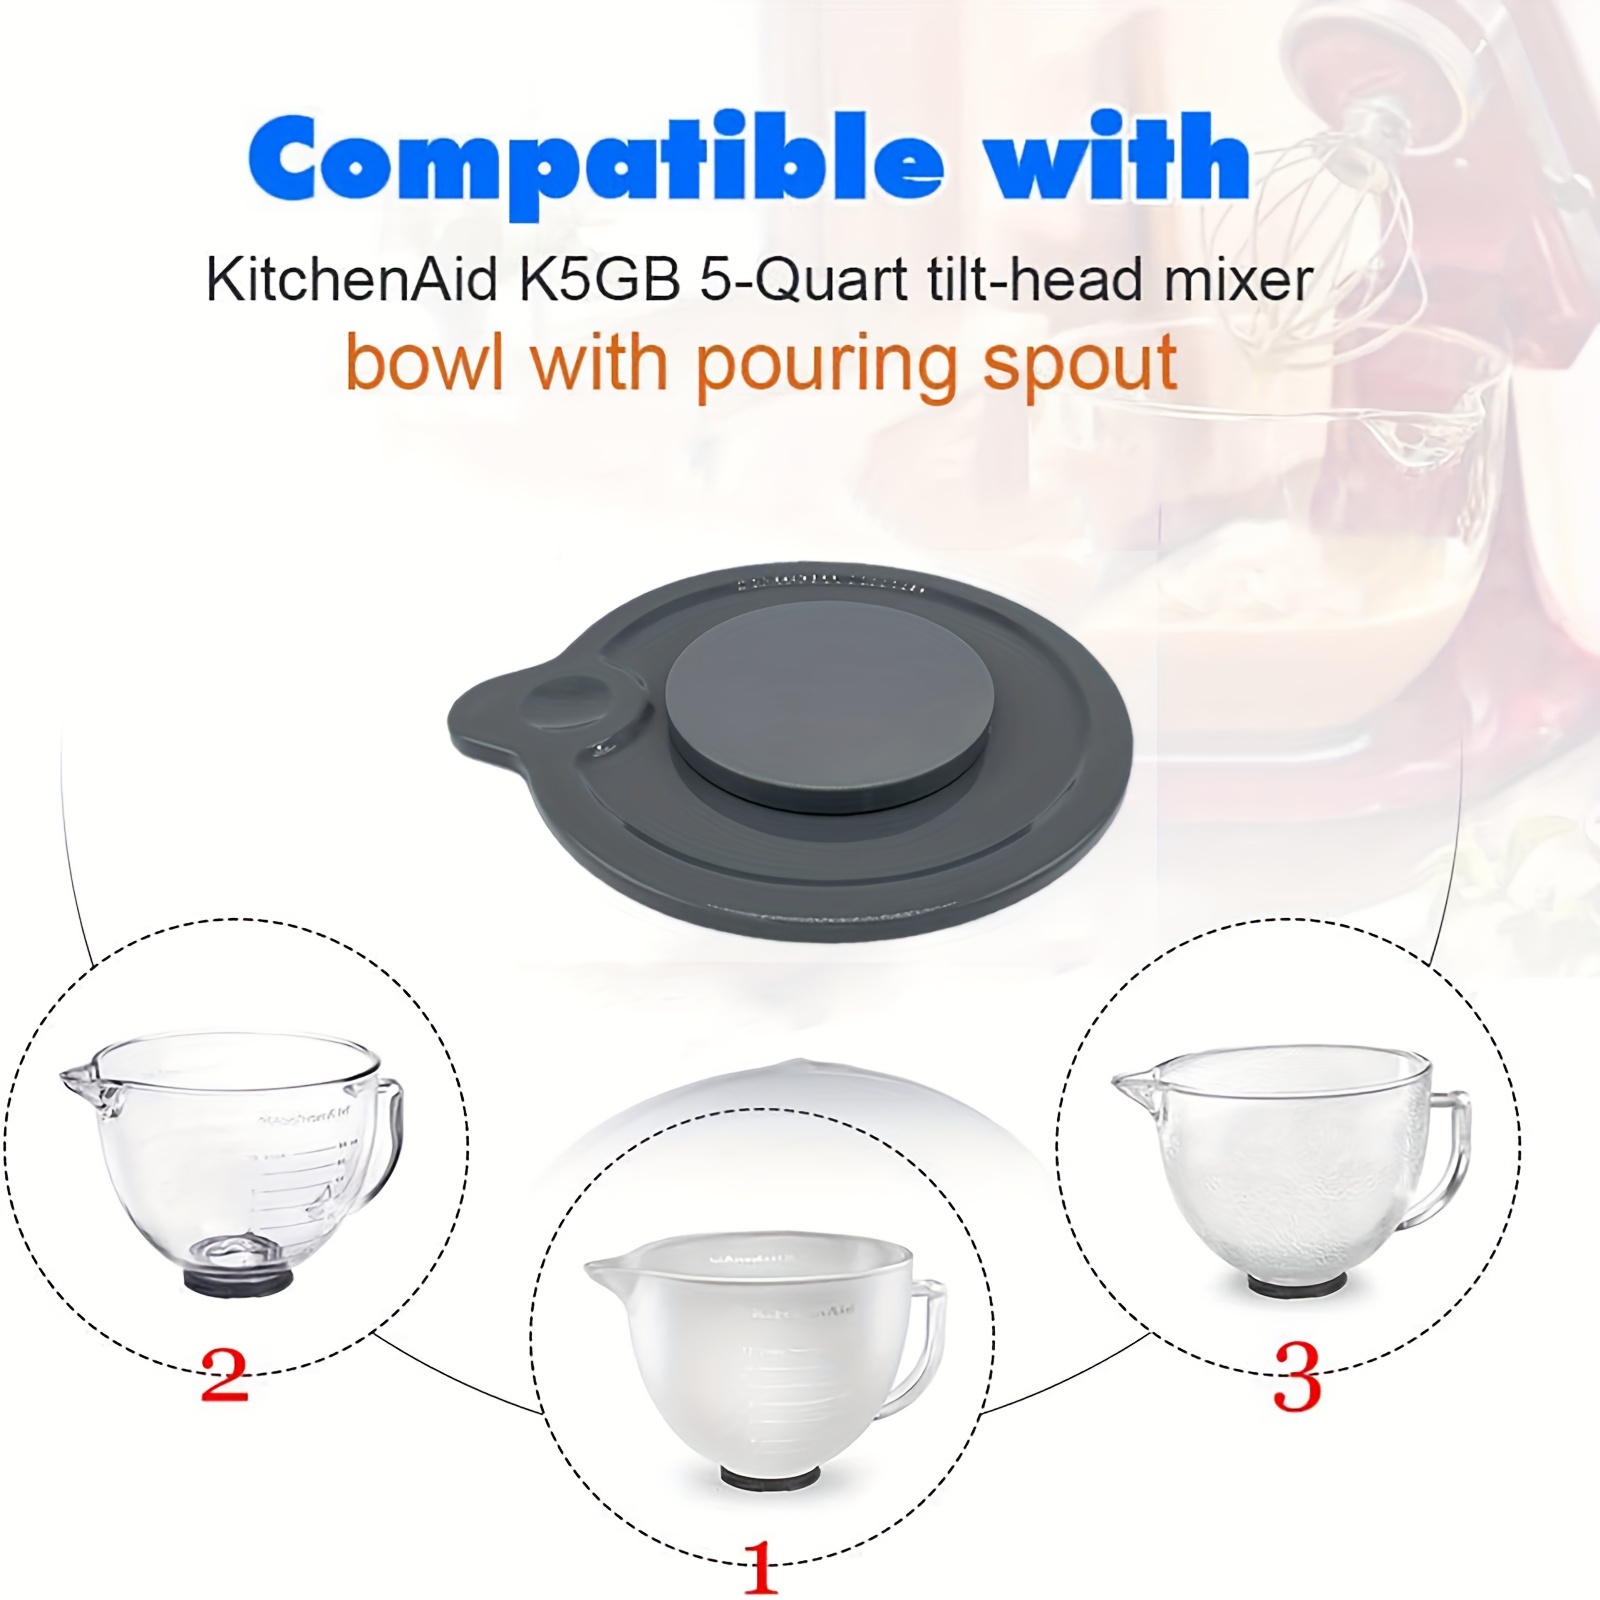 Generic Mixer Bowl Cover for KitchenAid Tilt-Head 4.5-5 Quart Stand Mixer,  Mixer Assecories Bowl Covers to Prevent Ingredients from Spi